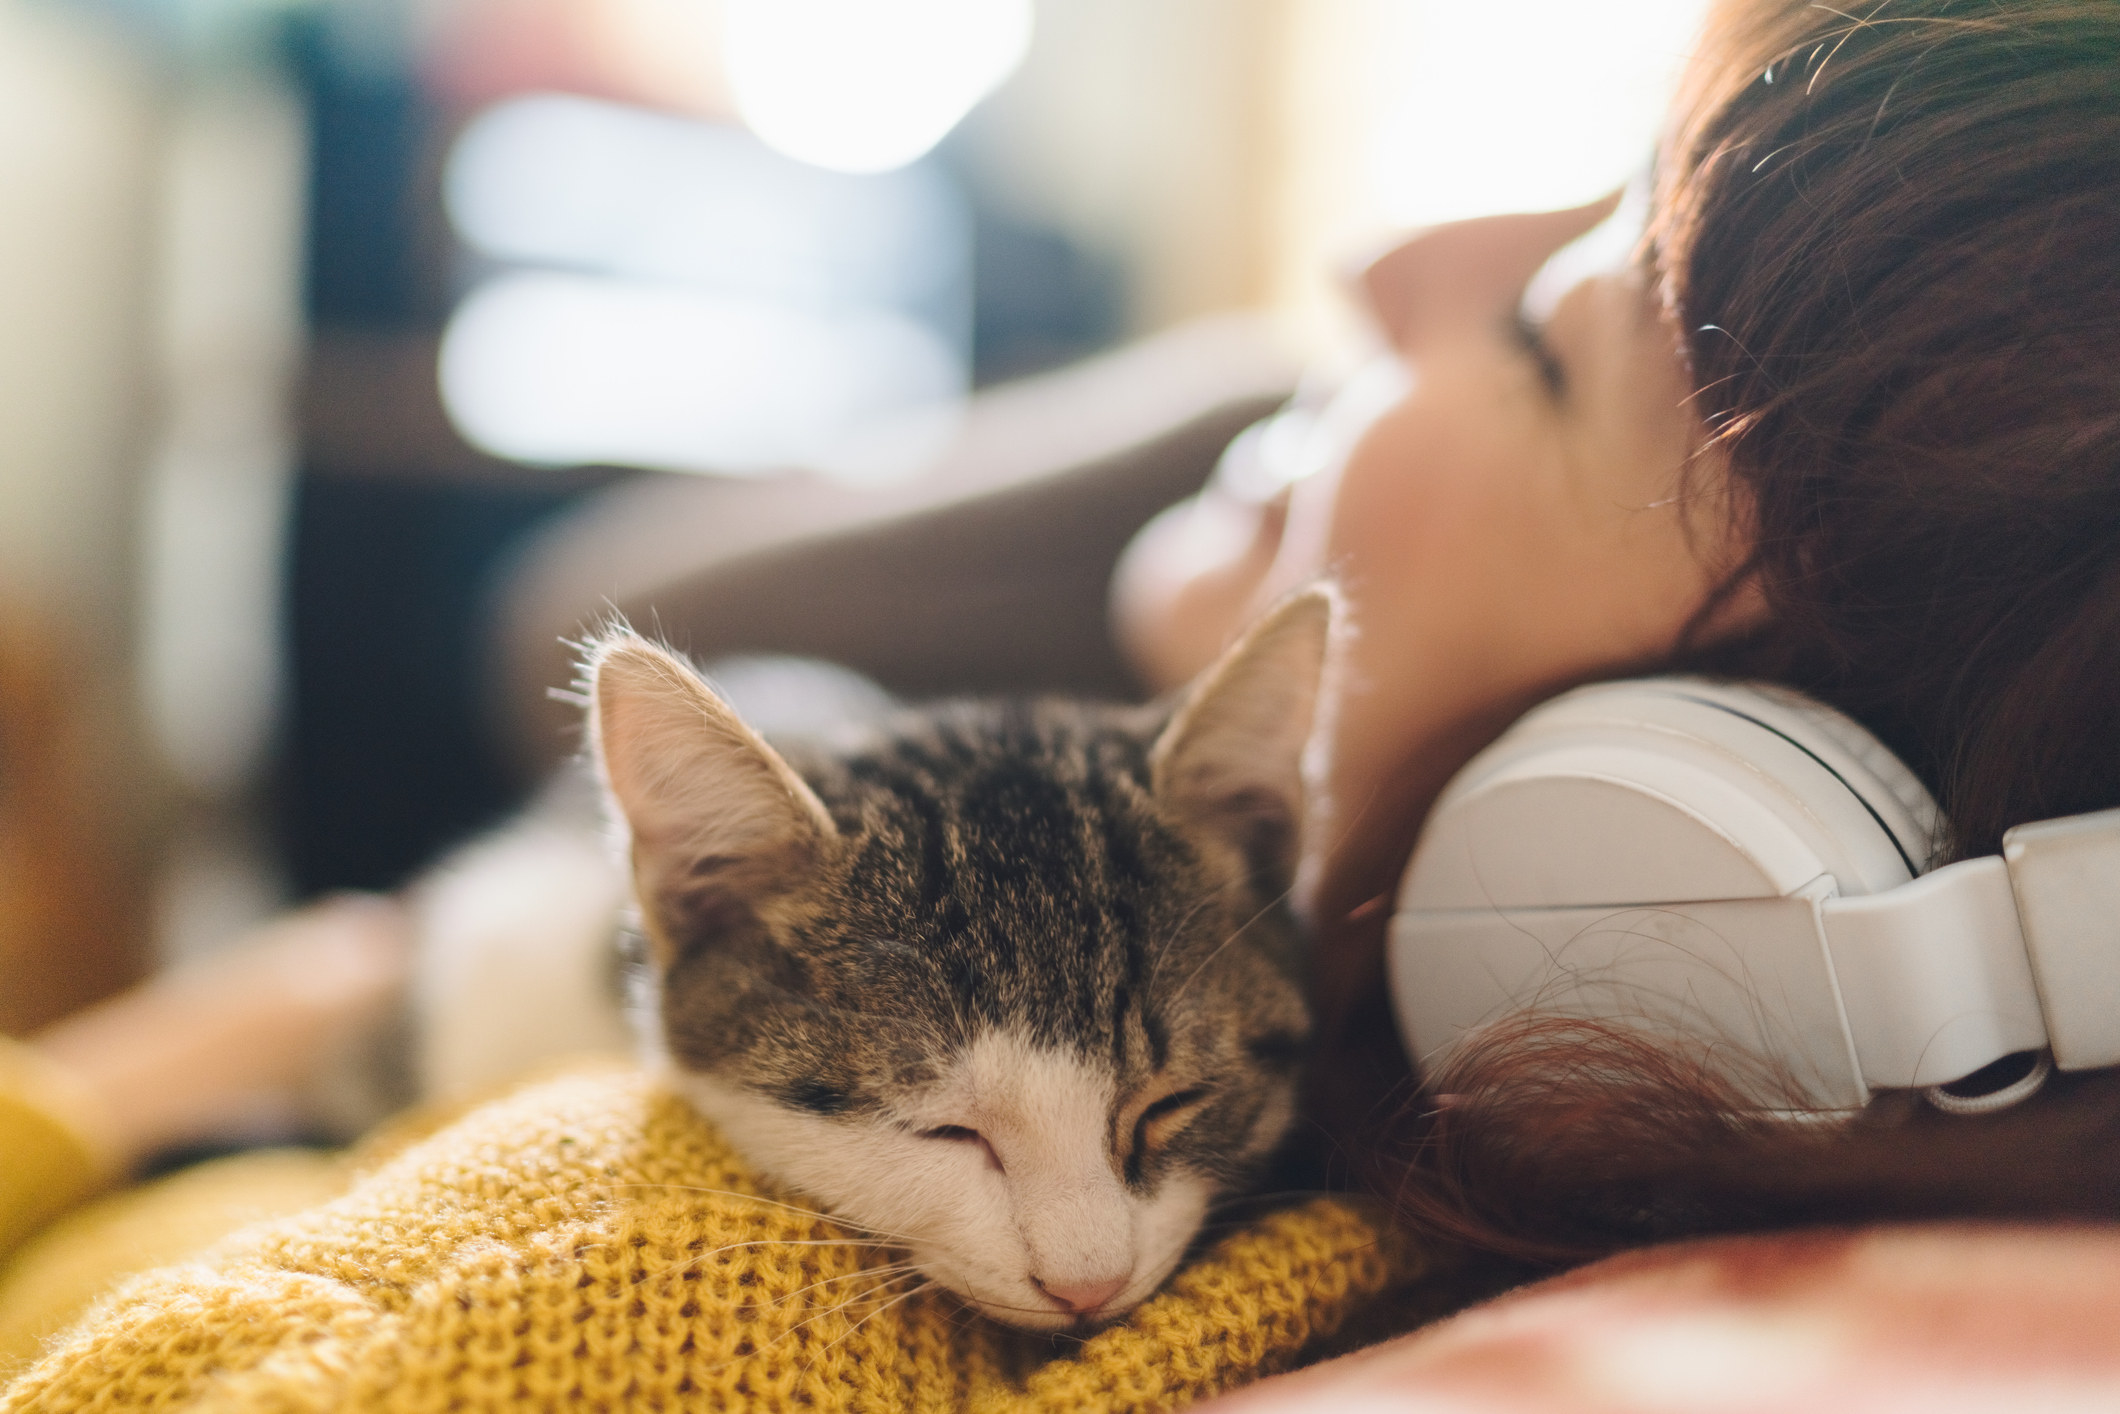 Girl with eyes closed cuddling a cat